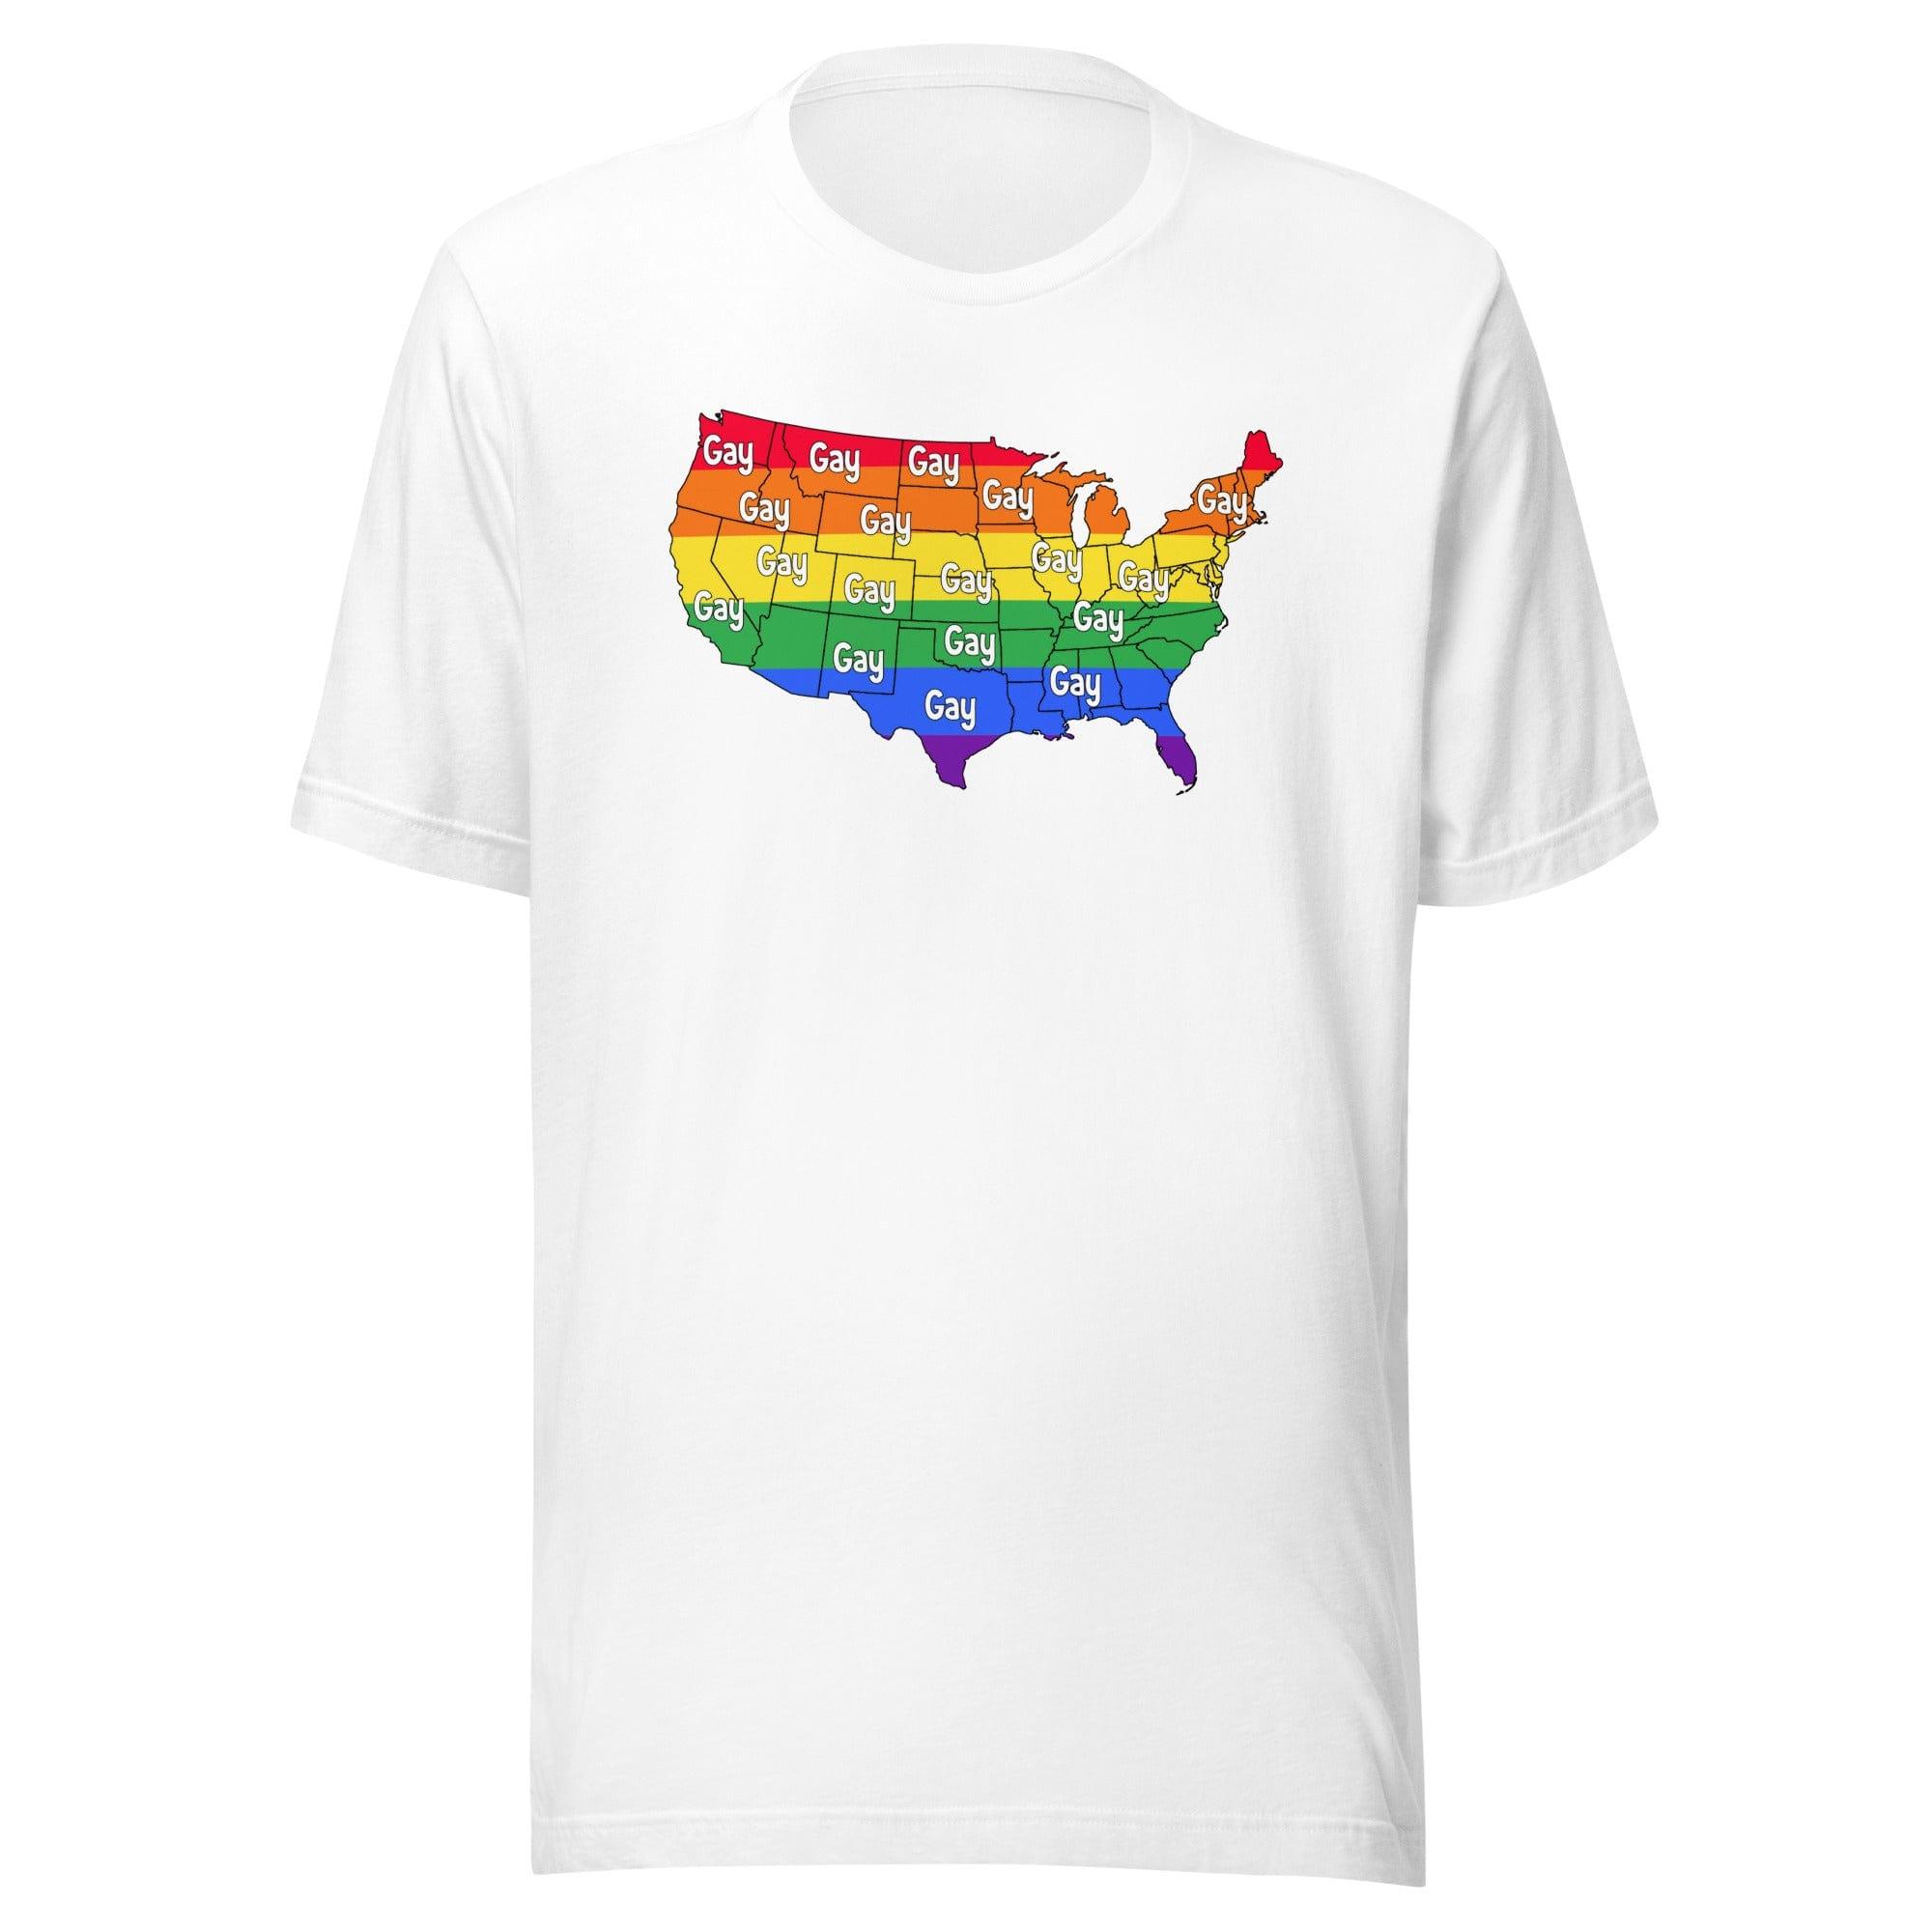 Gay Pride T-shirt US Map Showing National Forecast Gay For all States Short Sleeve Unisex Top - TopKoalaTee